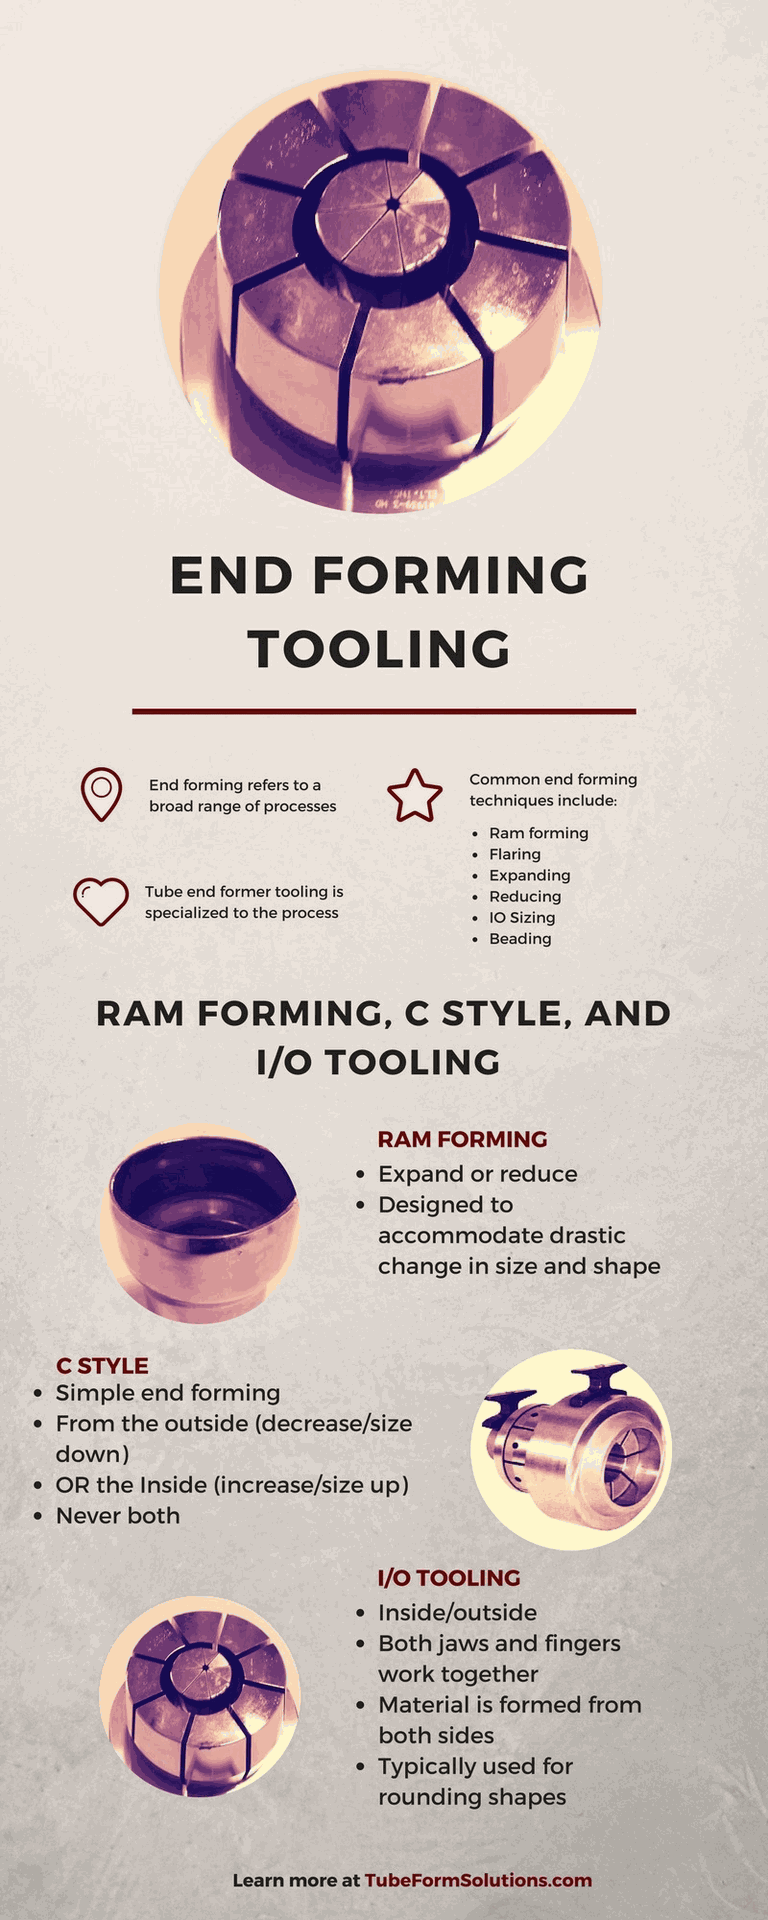 End_Forming_Tooling_infographic_8.17.png